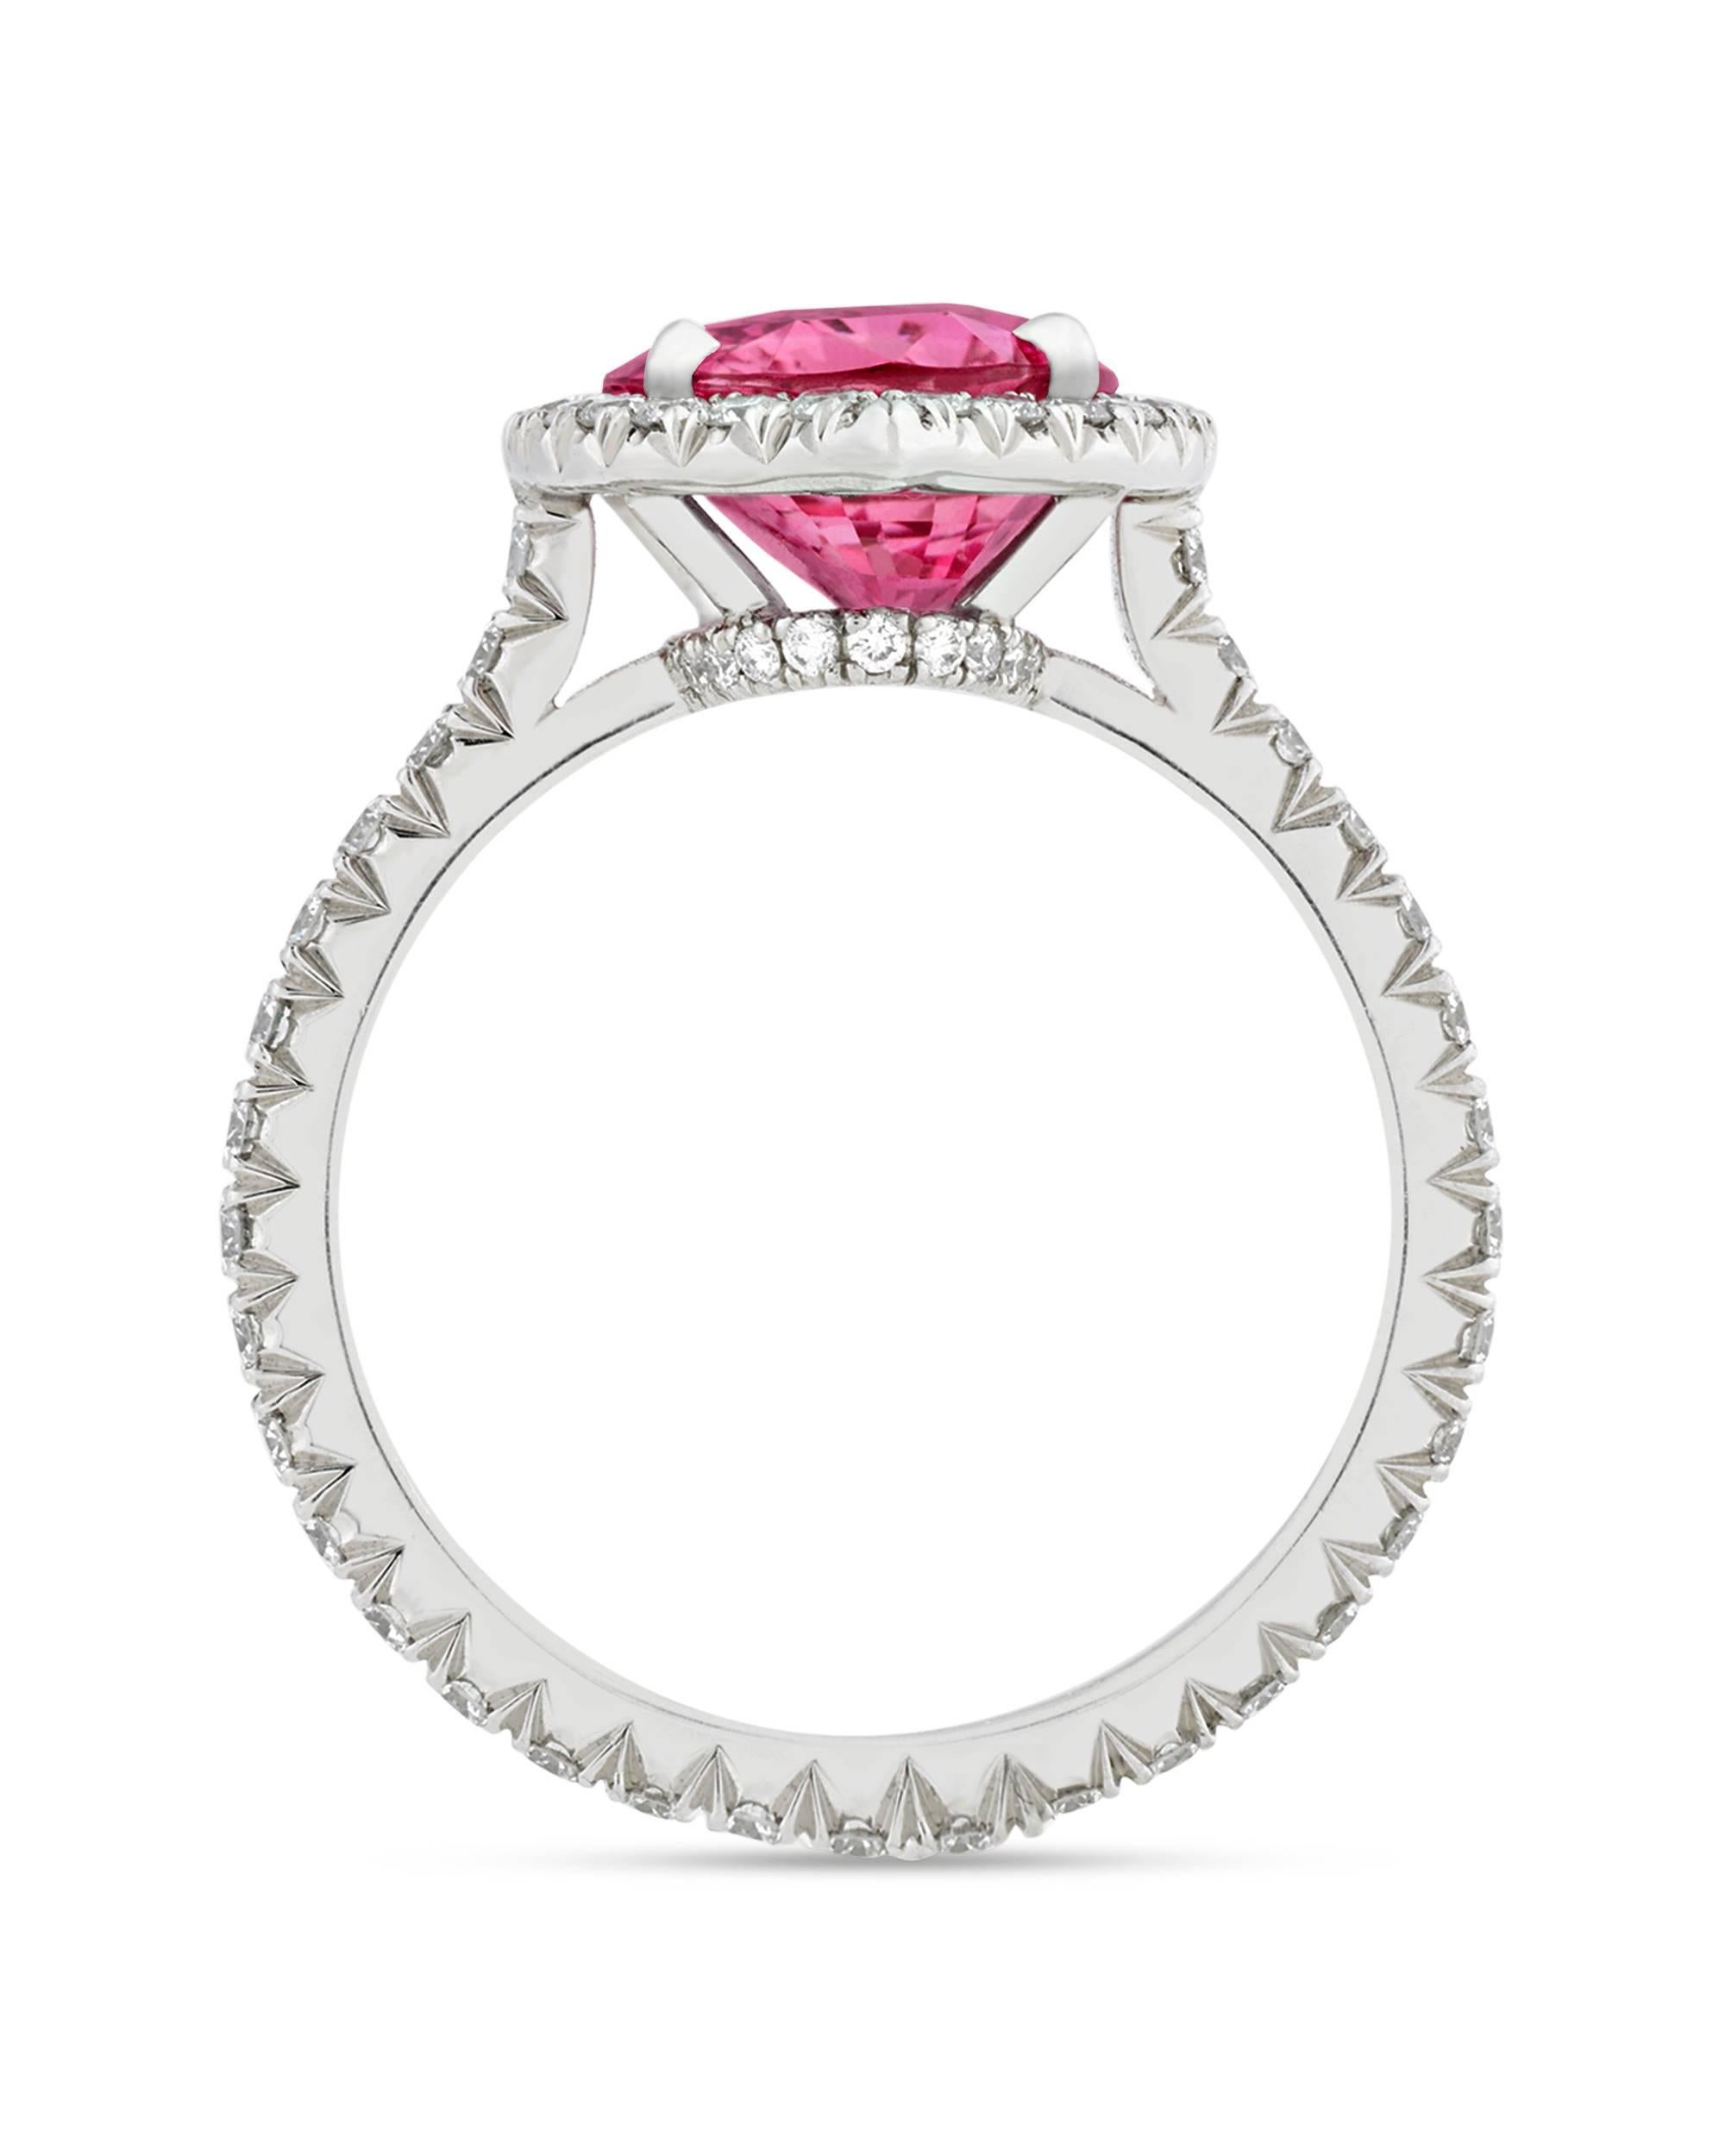 Certified by C. Dunaigre of Switzerland to be free of heat enhancement, this striking 4.03-carat untreated pink sapphire achieves its mesmerizingly rich rose hue naturally. The oval-shaped/mixed-cut sapphire showcases amazing transparency and